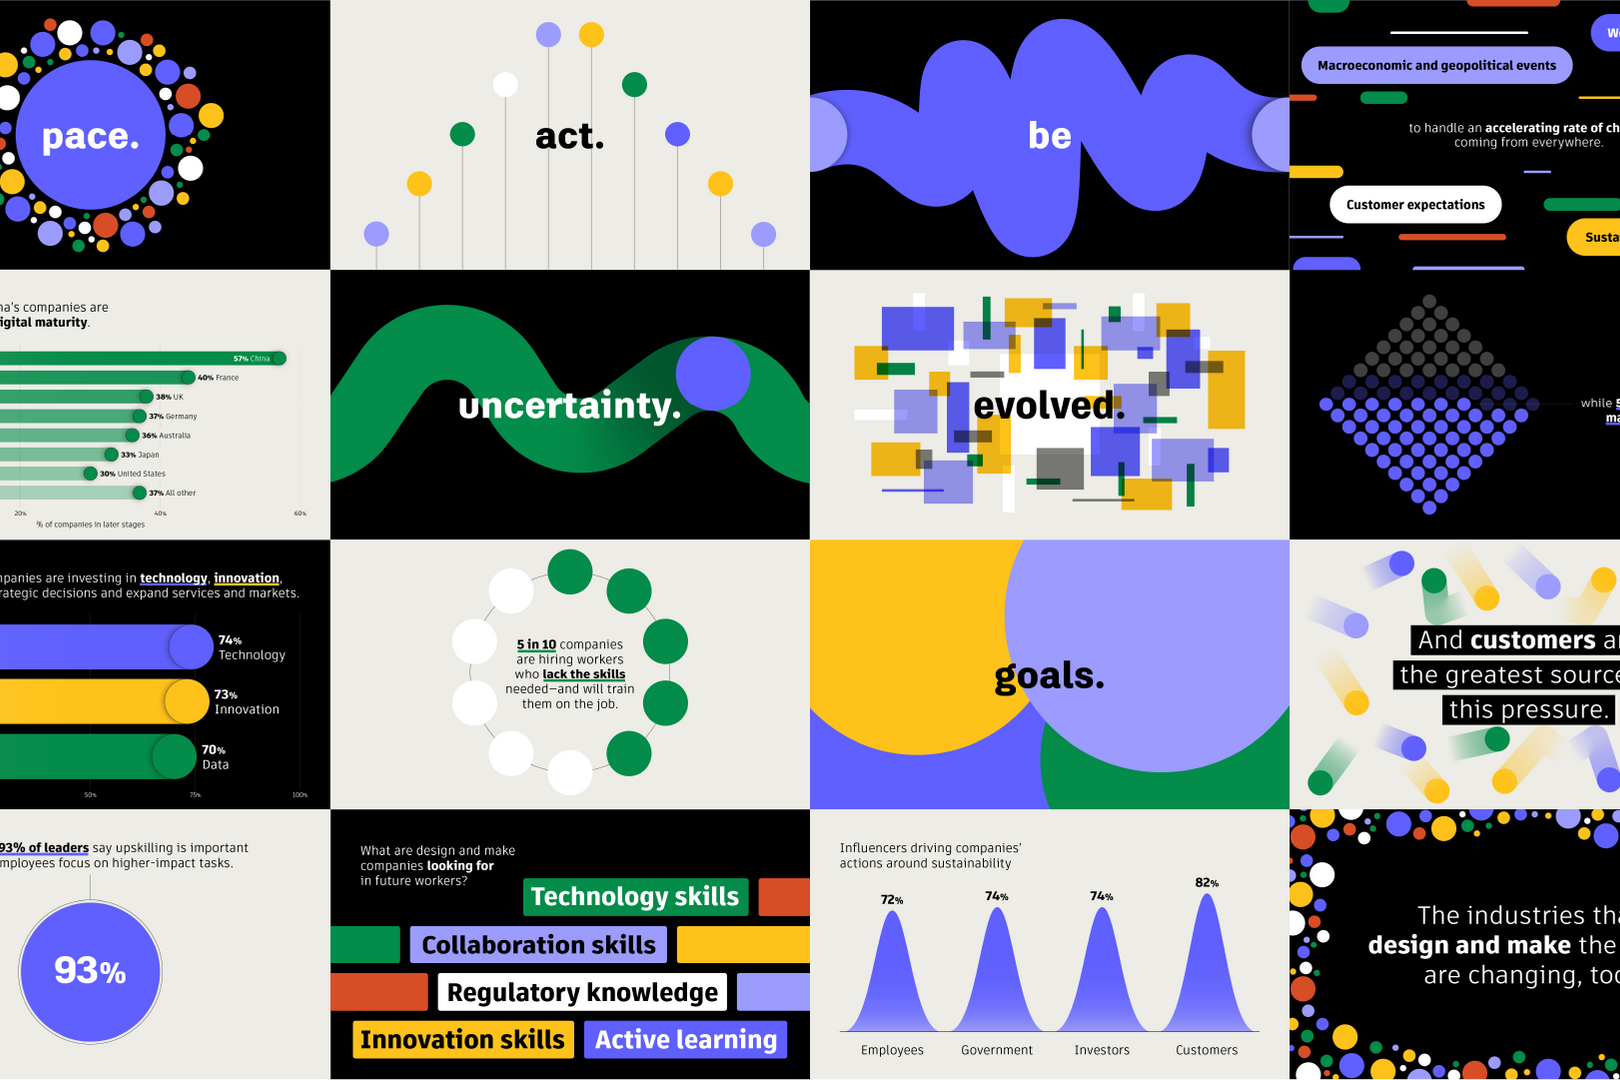 A collage of stills used in the State of Design and Make video.